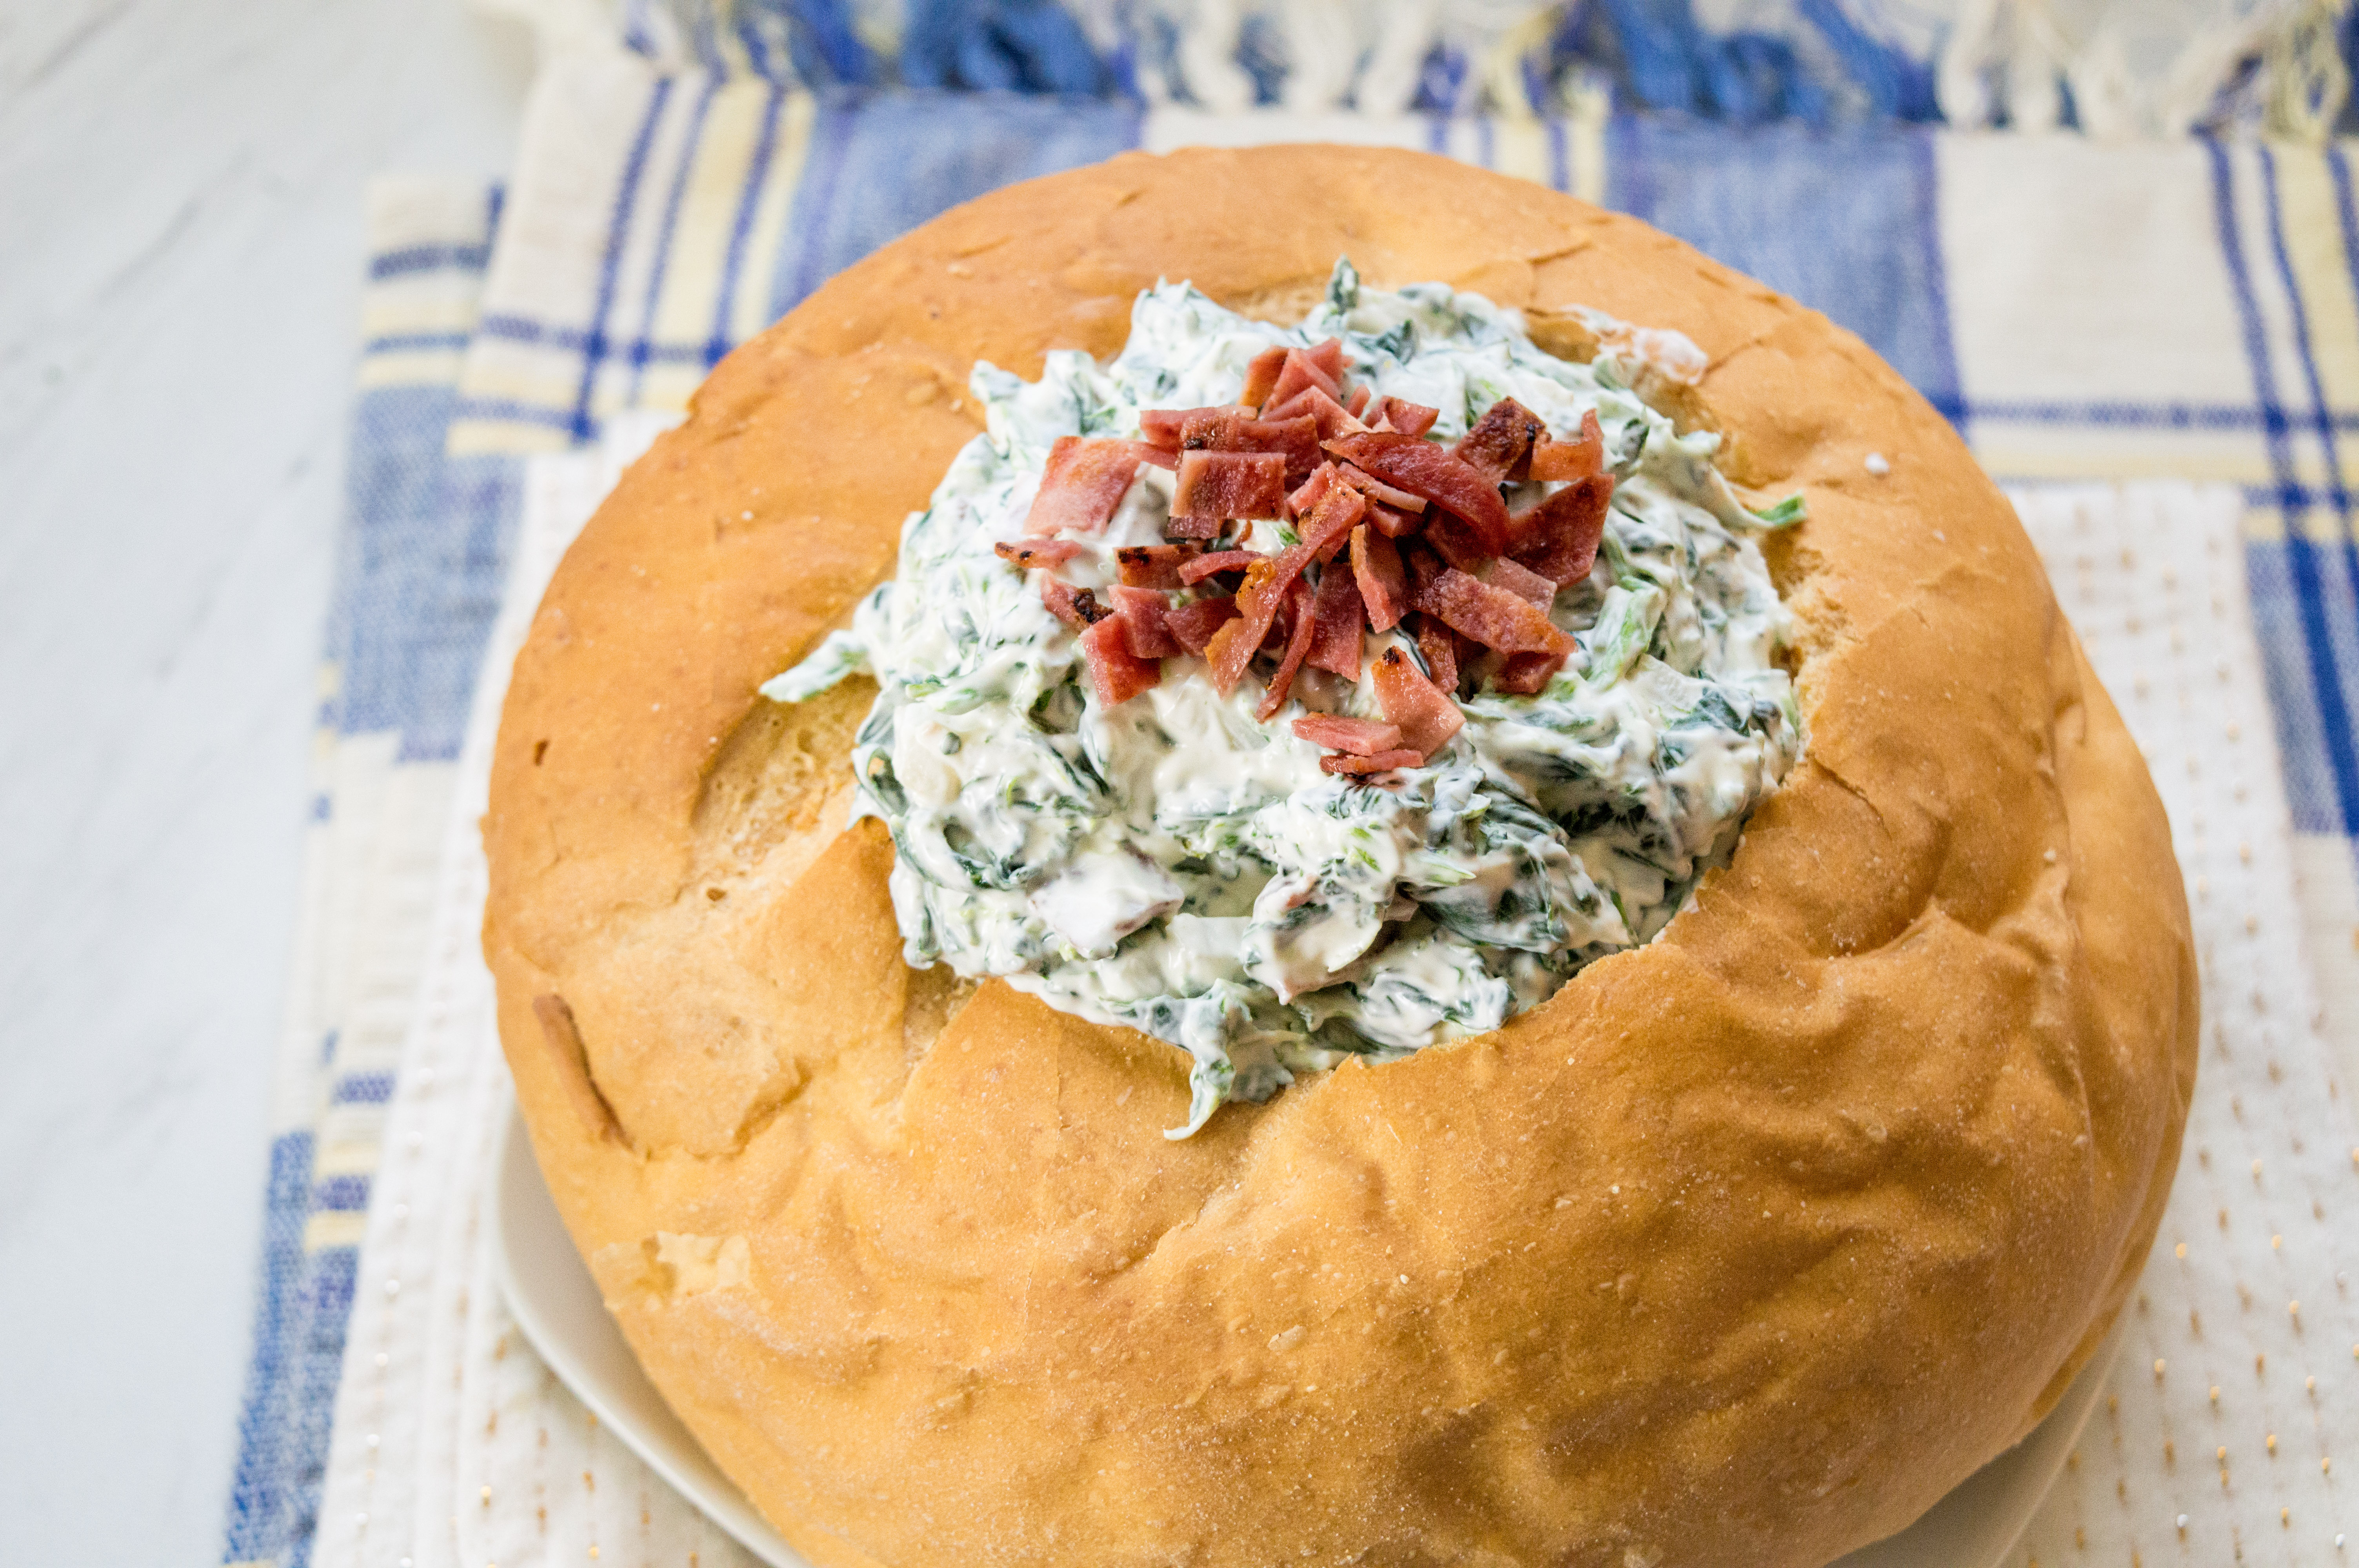 Love spinach dip? So do I. This spinach dip recipe, an easy pot luck recipe, will leave you craving more once you add my special ingredient. Bacon!